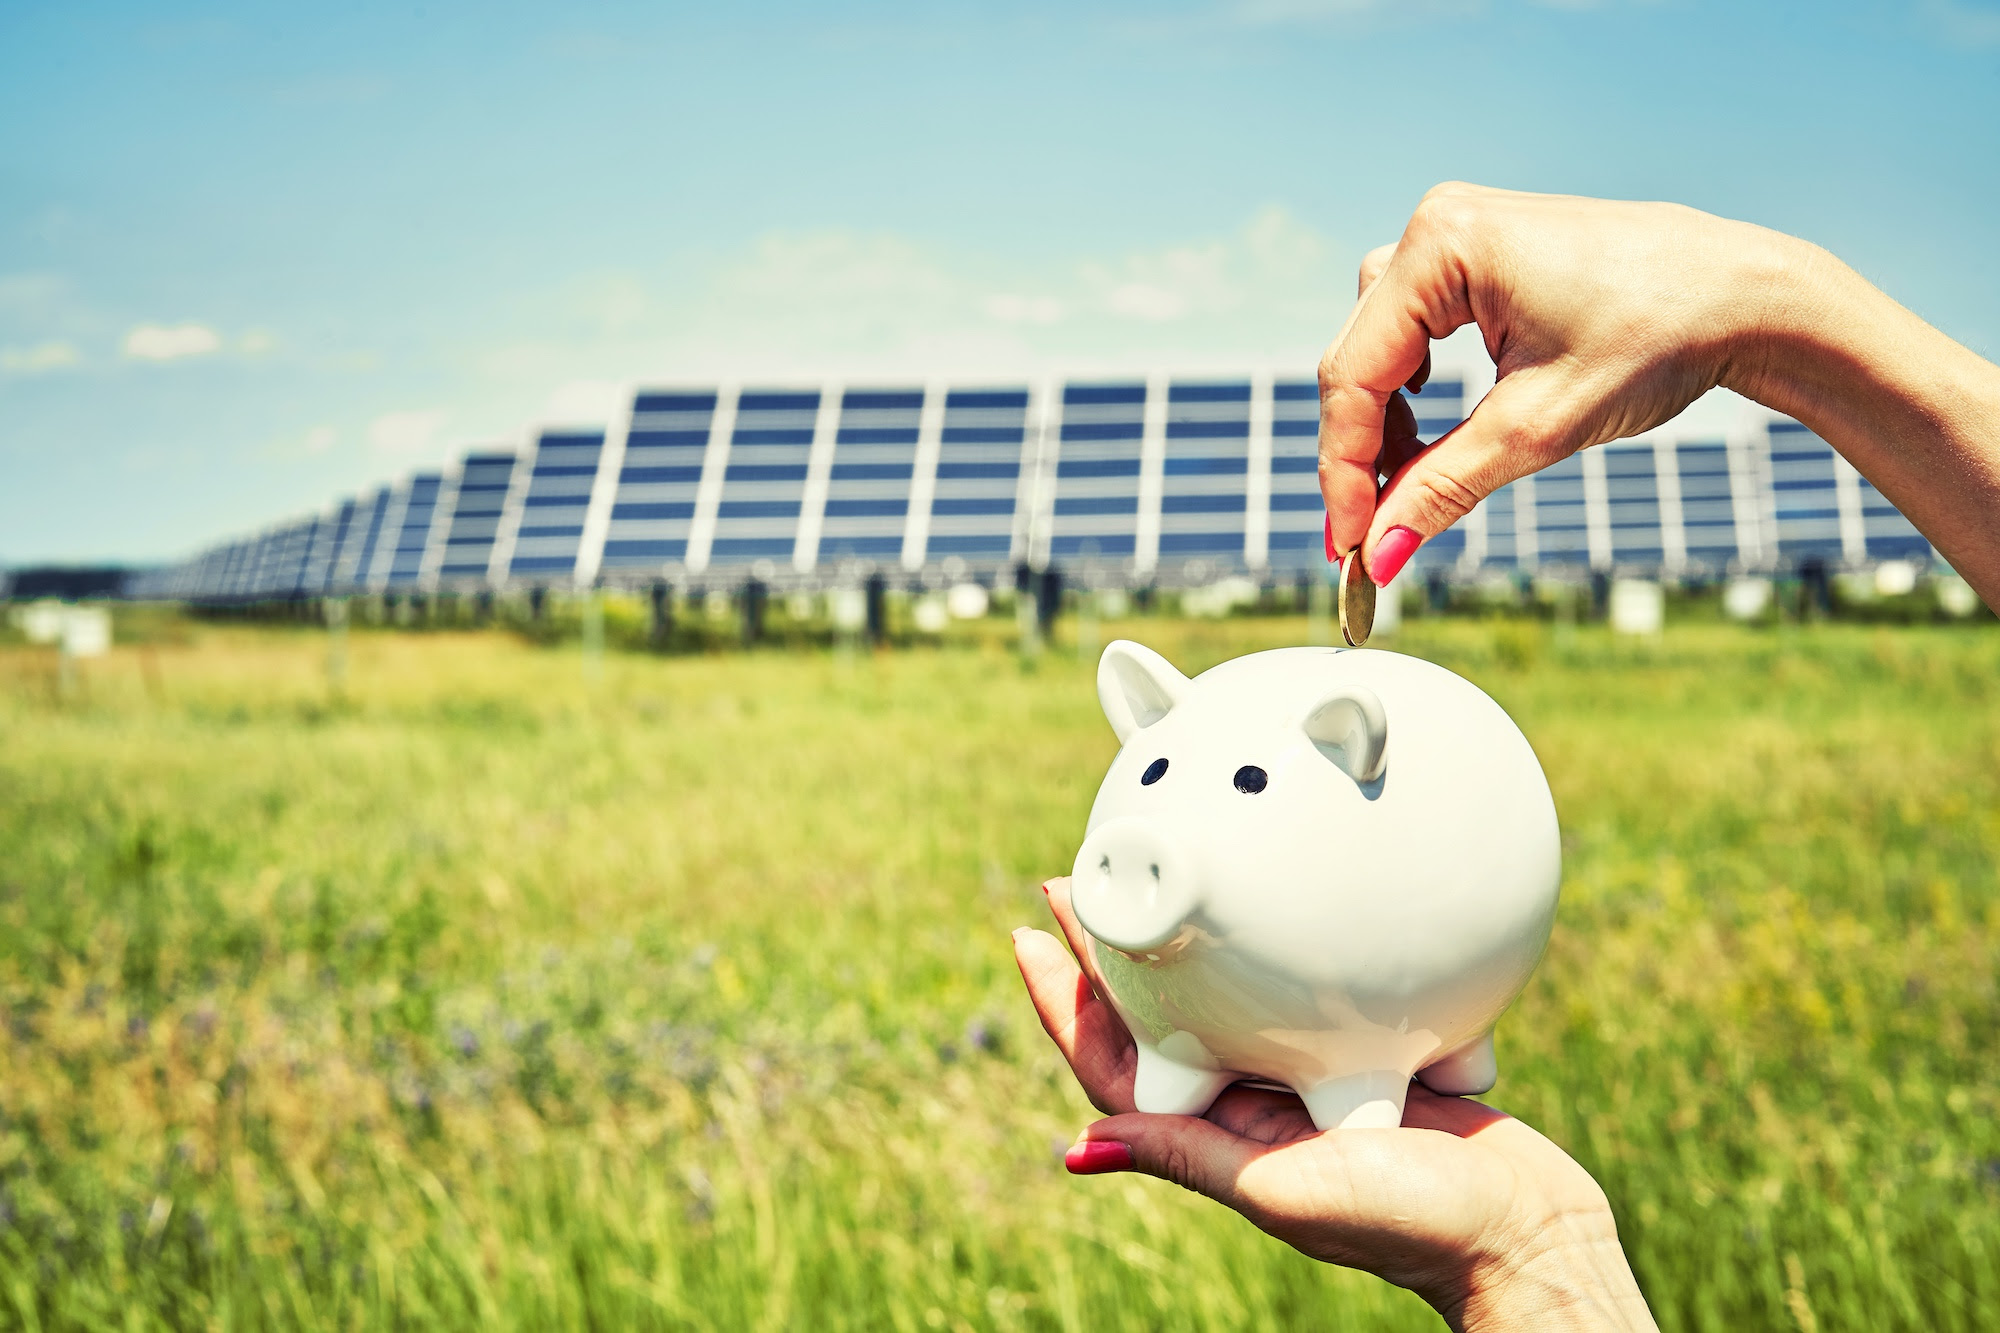 Image of piggy bank with solar panels in background by Sergei Domashenko